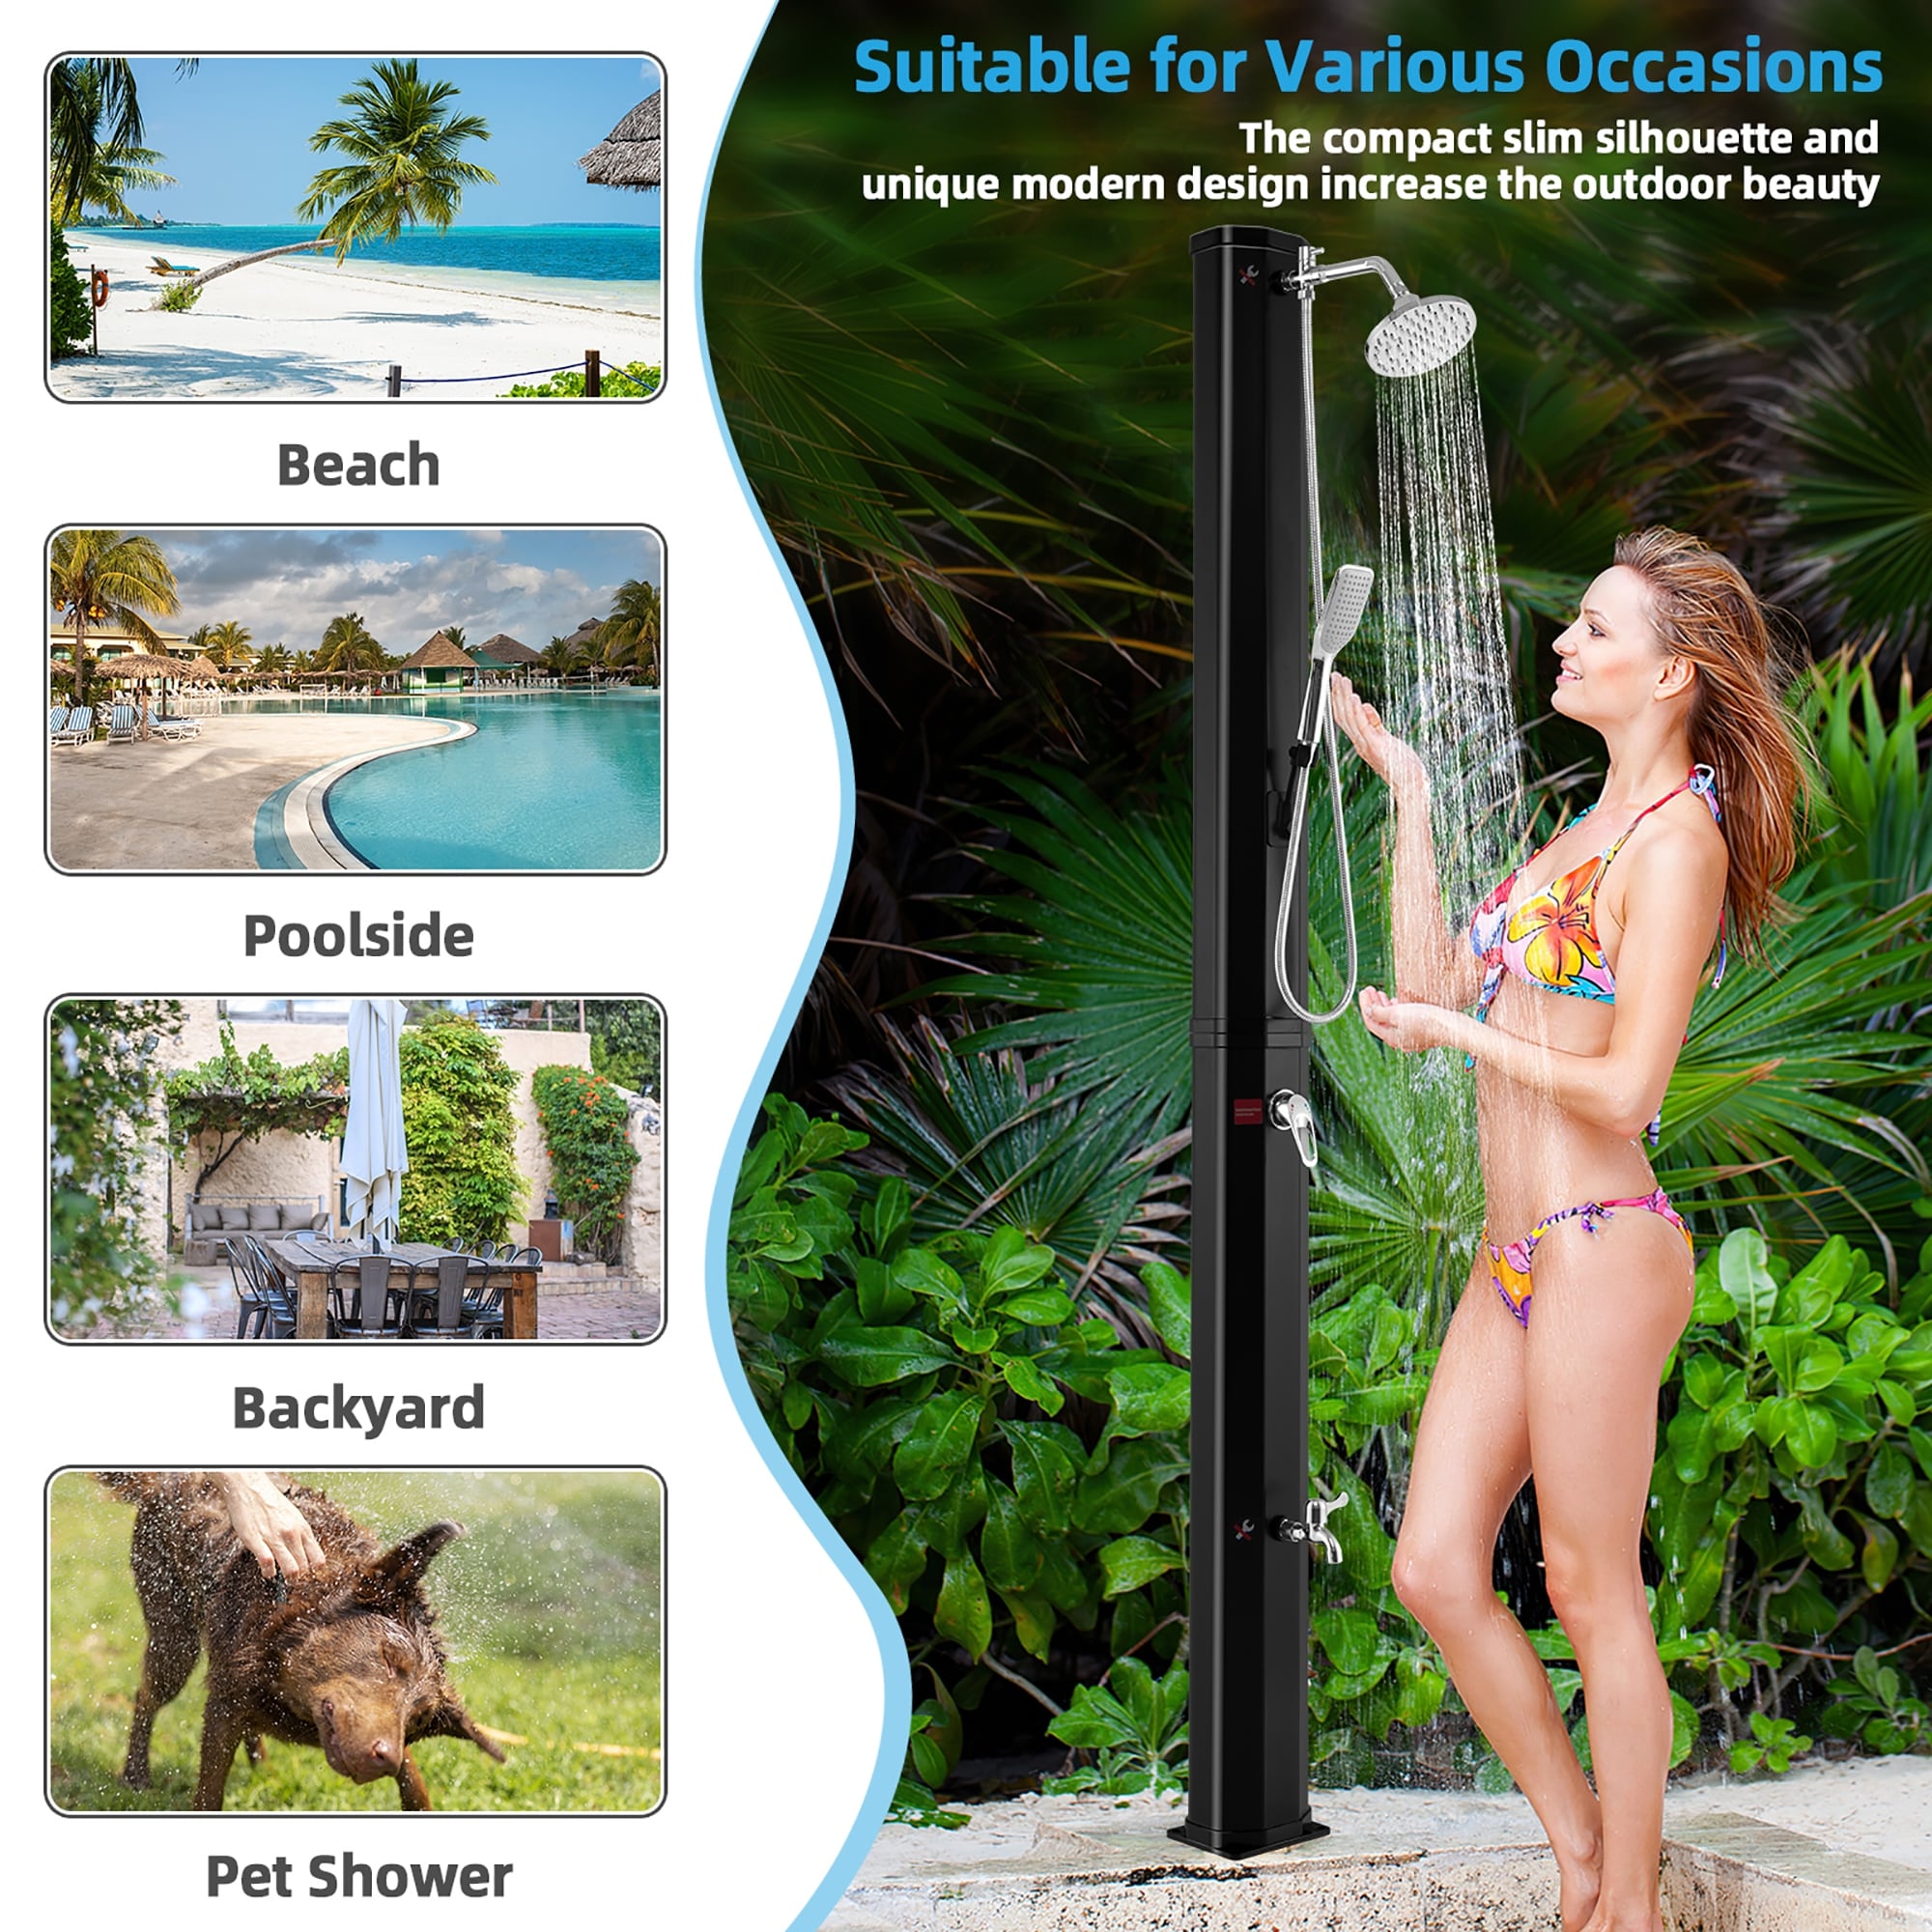 Costway 7.2 FT 9.3 Gallon Solar Heated Shower w/ Rain Shower, Foot - See  Details